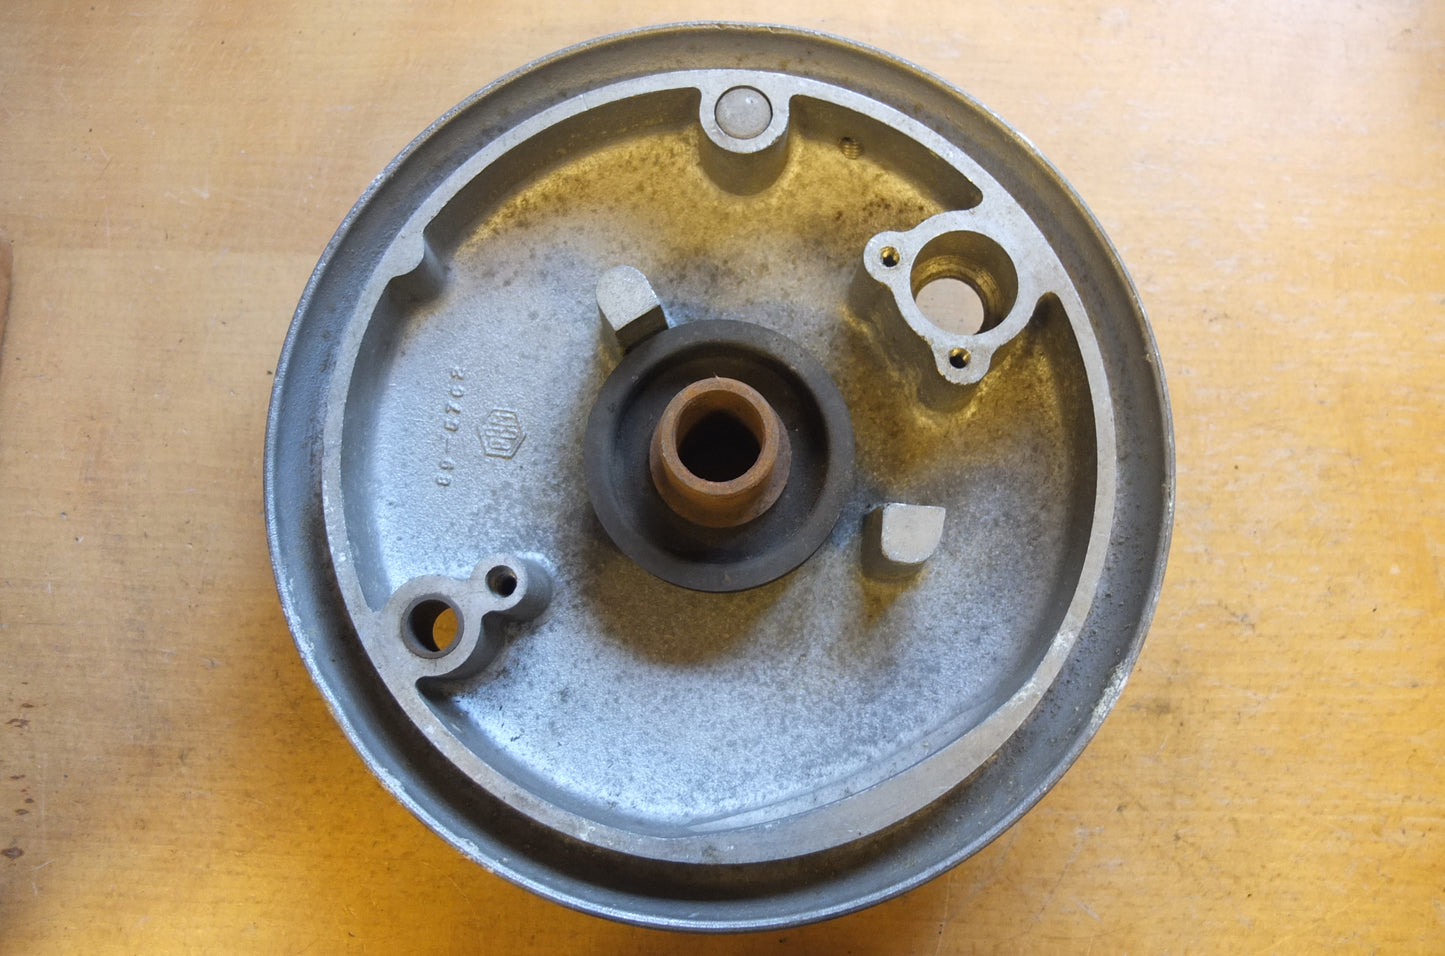 P7/020 S7 Front hub cotter plate (sometimes available - ask)